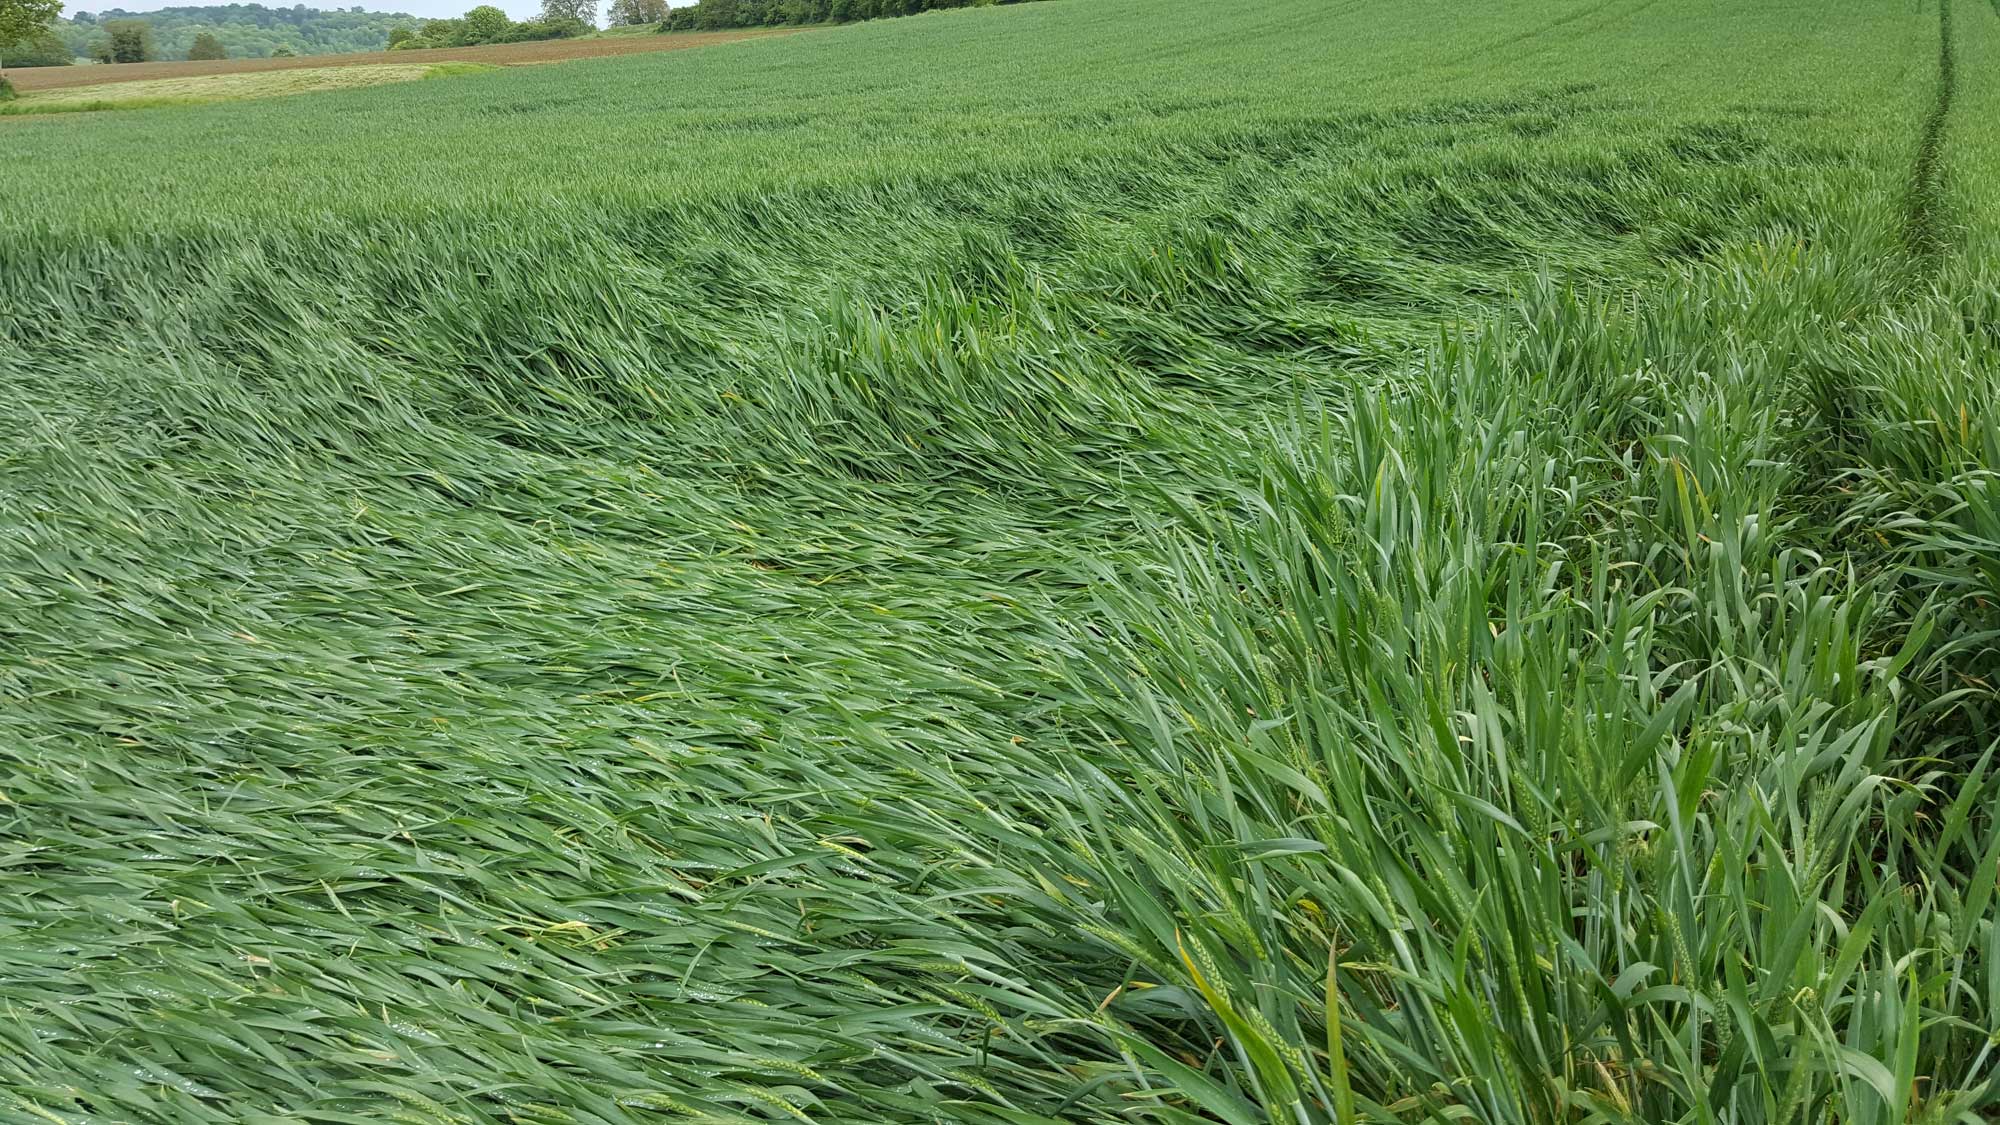 Photograph of a field of wheat showing the effects of lodging. The photo shows a field of green what plants. In the foreground, a large swath of plants is laying on the ground, a phenomenon called lodging.